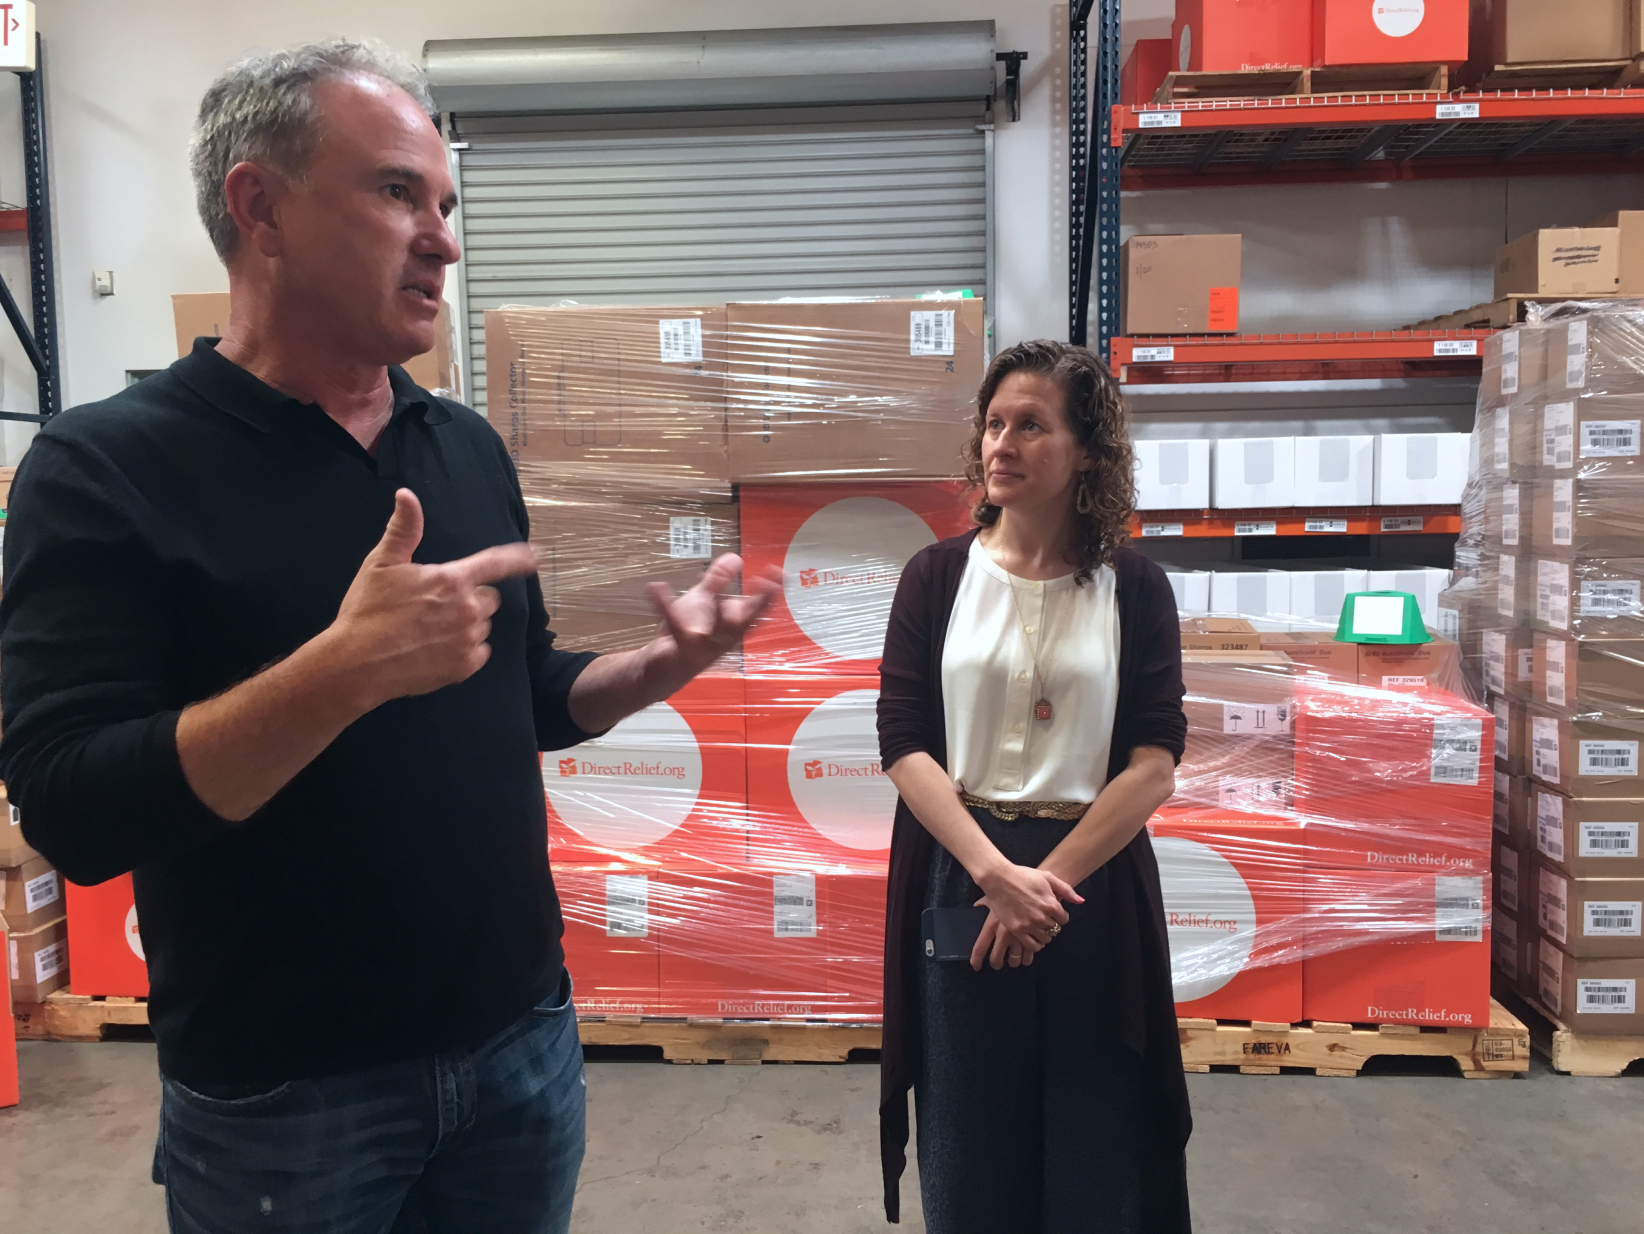 A woman listening to a gesturing man in a large warehouse in front of many shrinkwrapped orange boxes with the Direct Relief logo on them